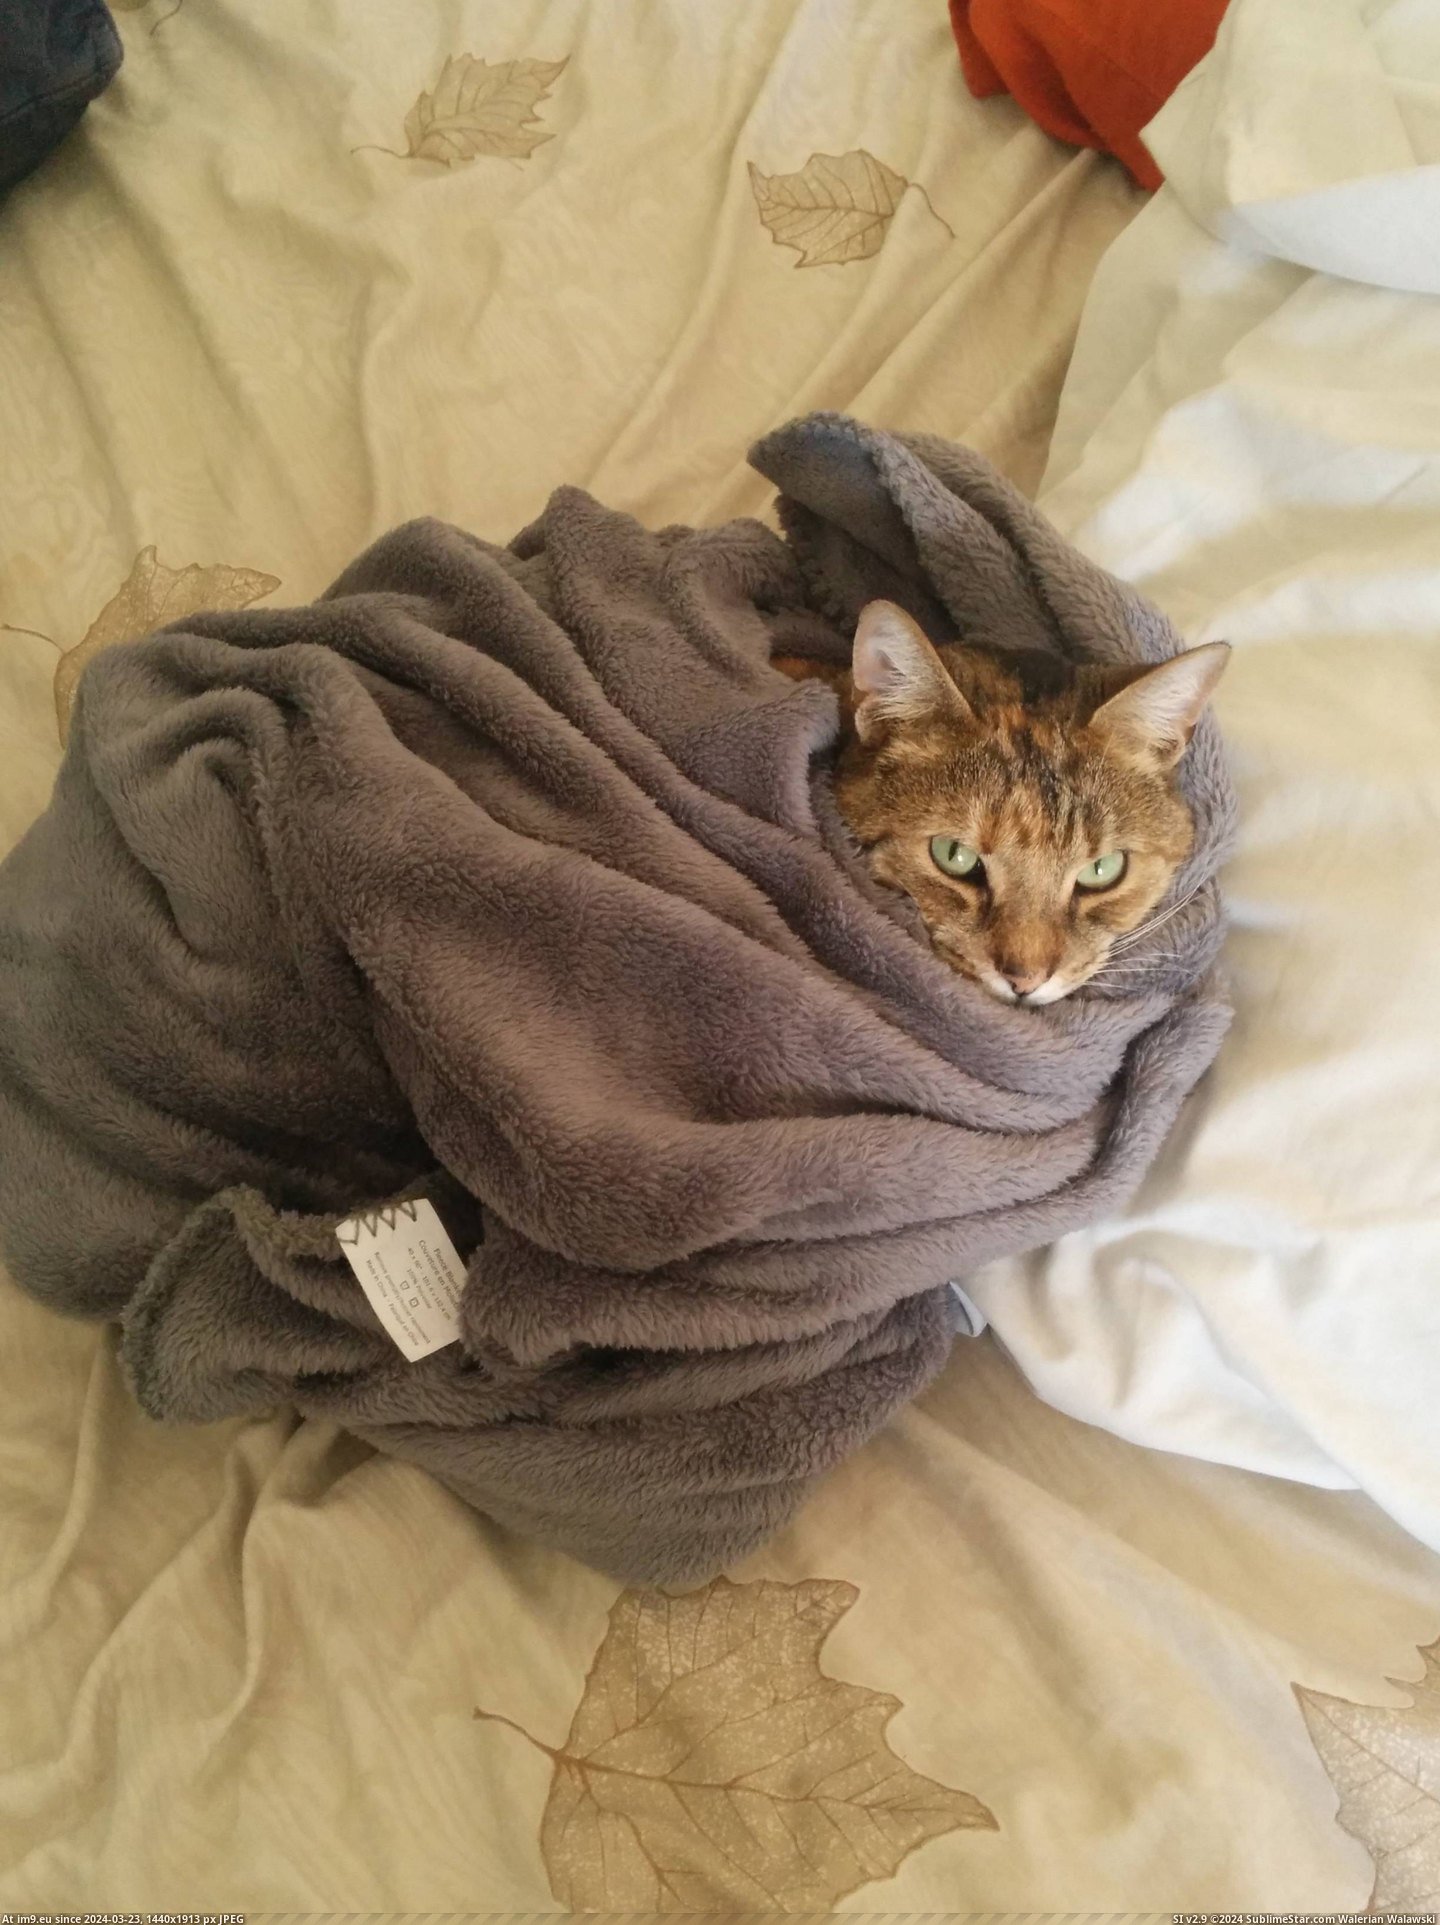 #Morning #Meows #Wrap [Aww] She meows every morning until I wrap her up Pic. (Obraz z album My r/AWW favs))